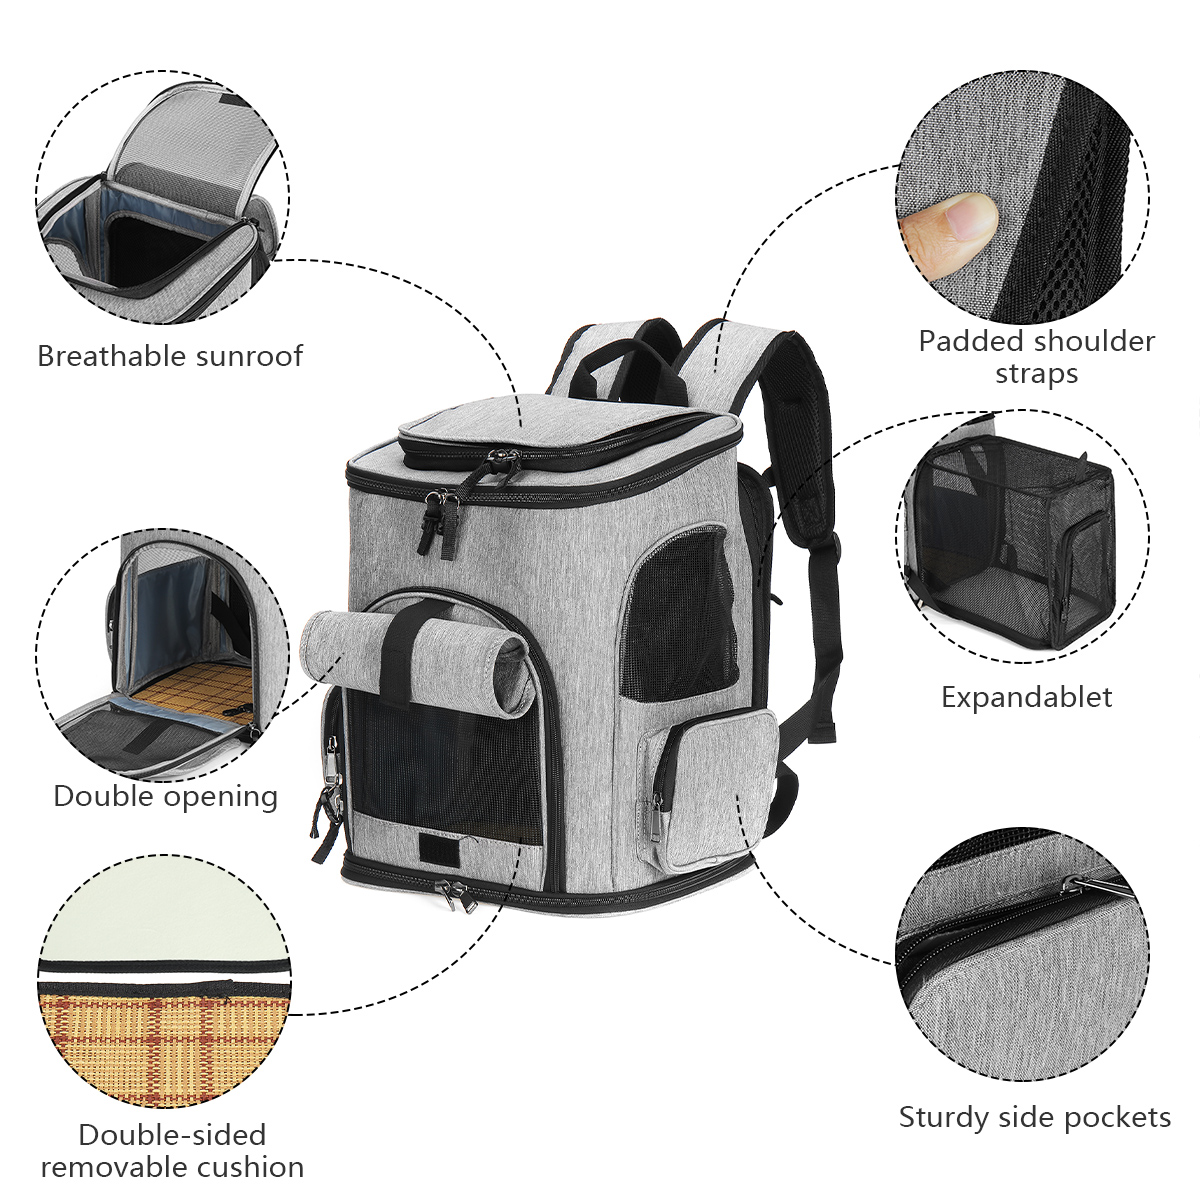 Pet-Carrier-Backpack-Breathable-Puppy-Travel-Space-Shoulder-Bag-Dog-Cat-Outdoor-Double-sided-cushion-1925739-7